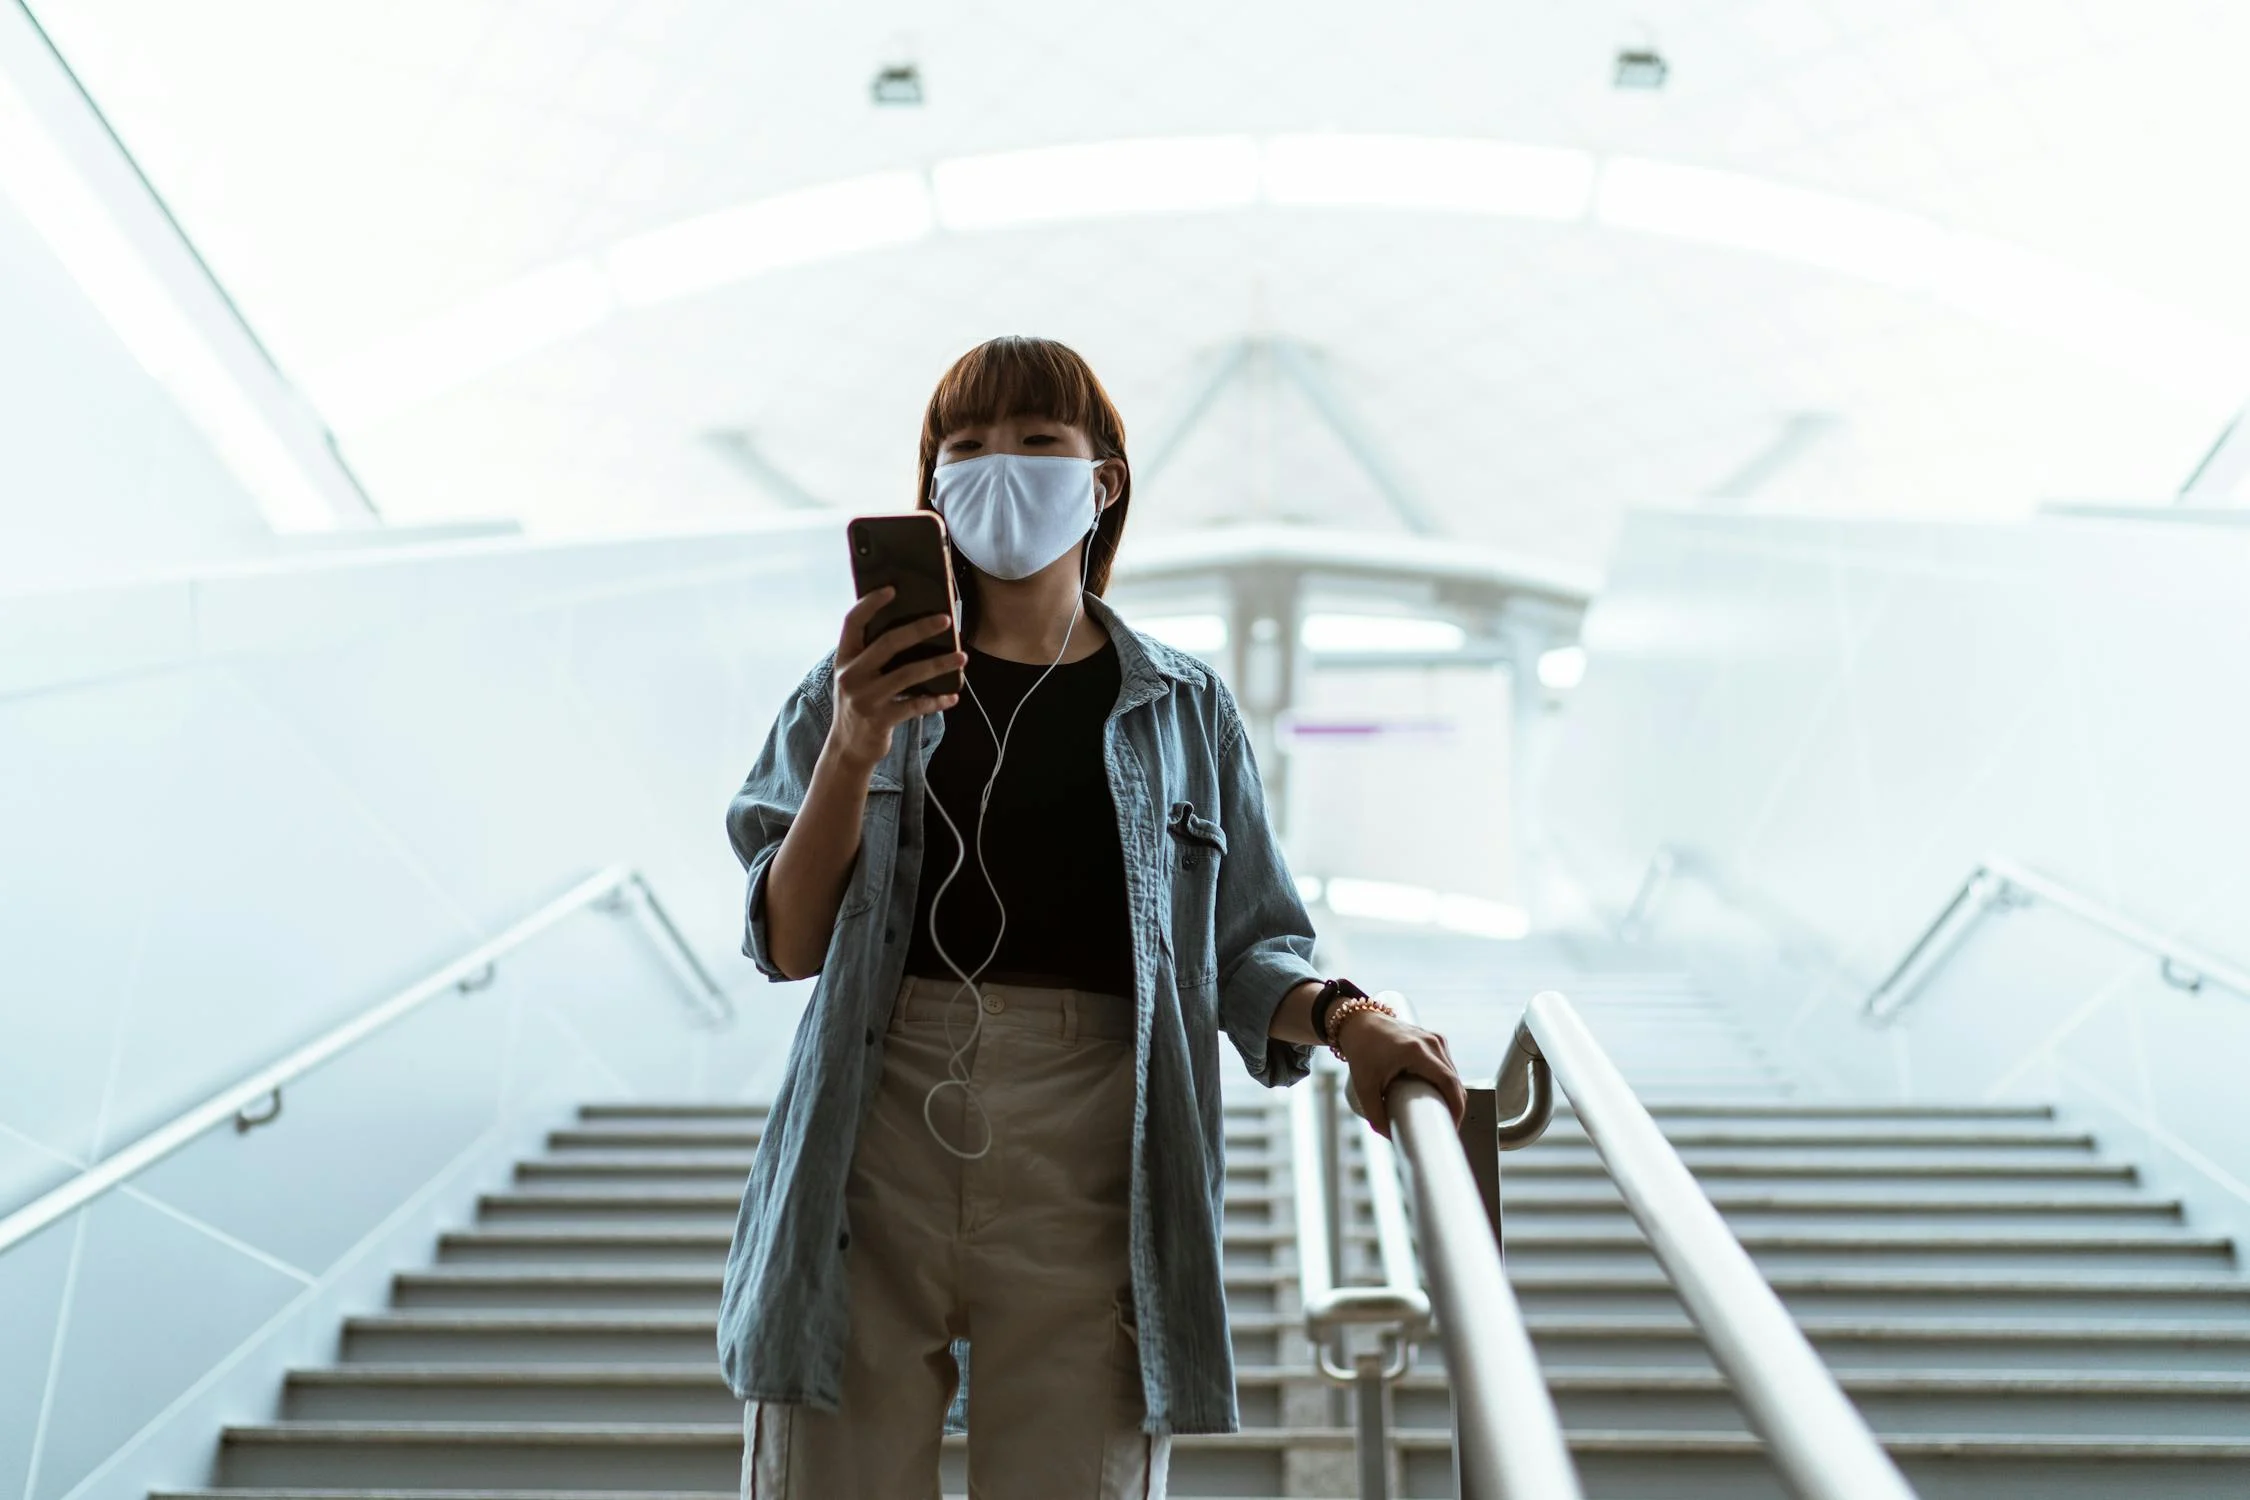 woman wearing a face mask and holding a smartphone